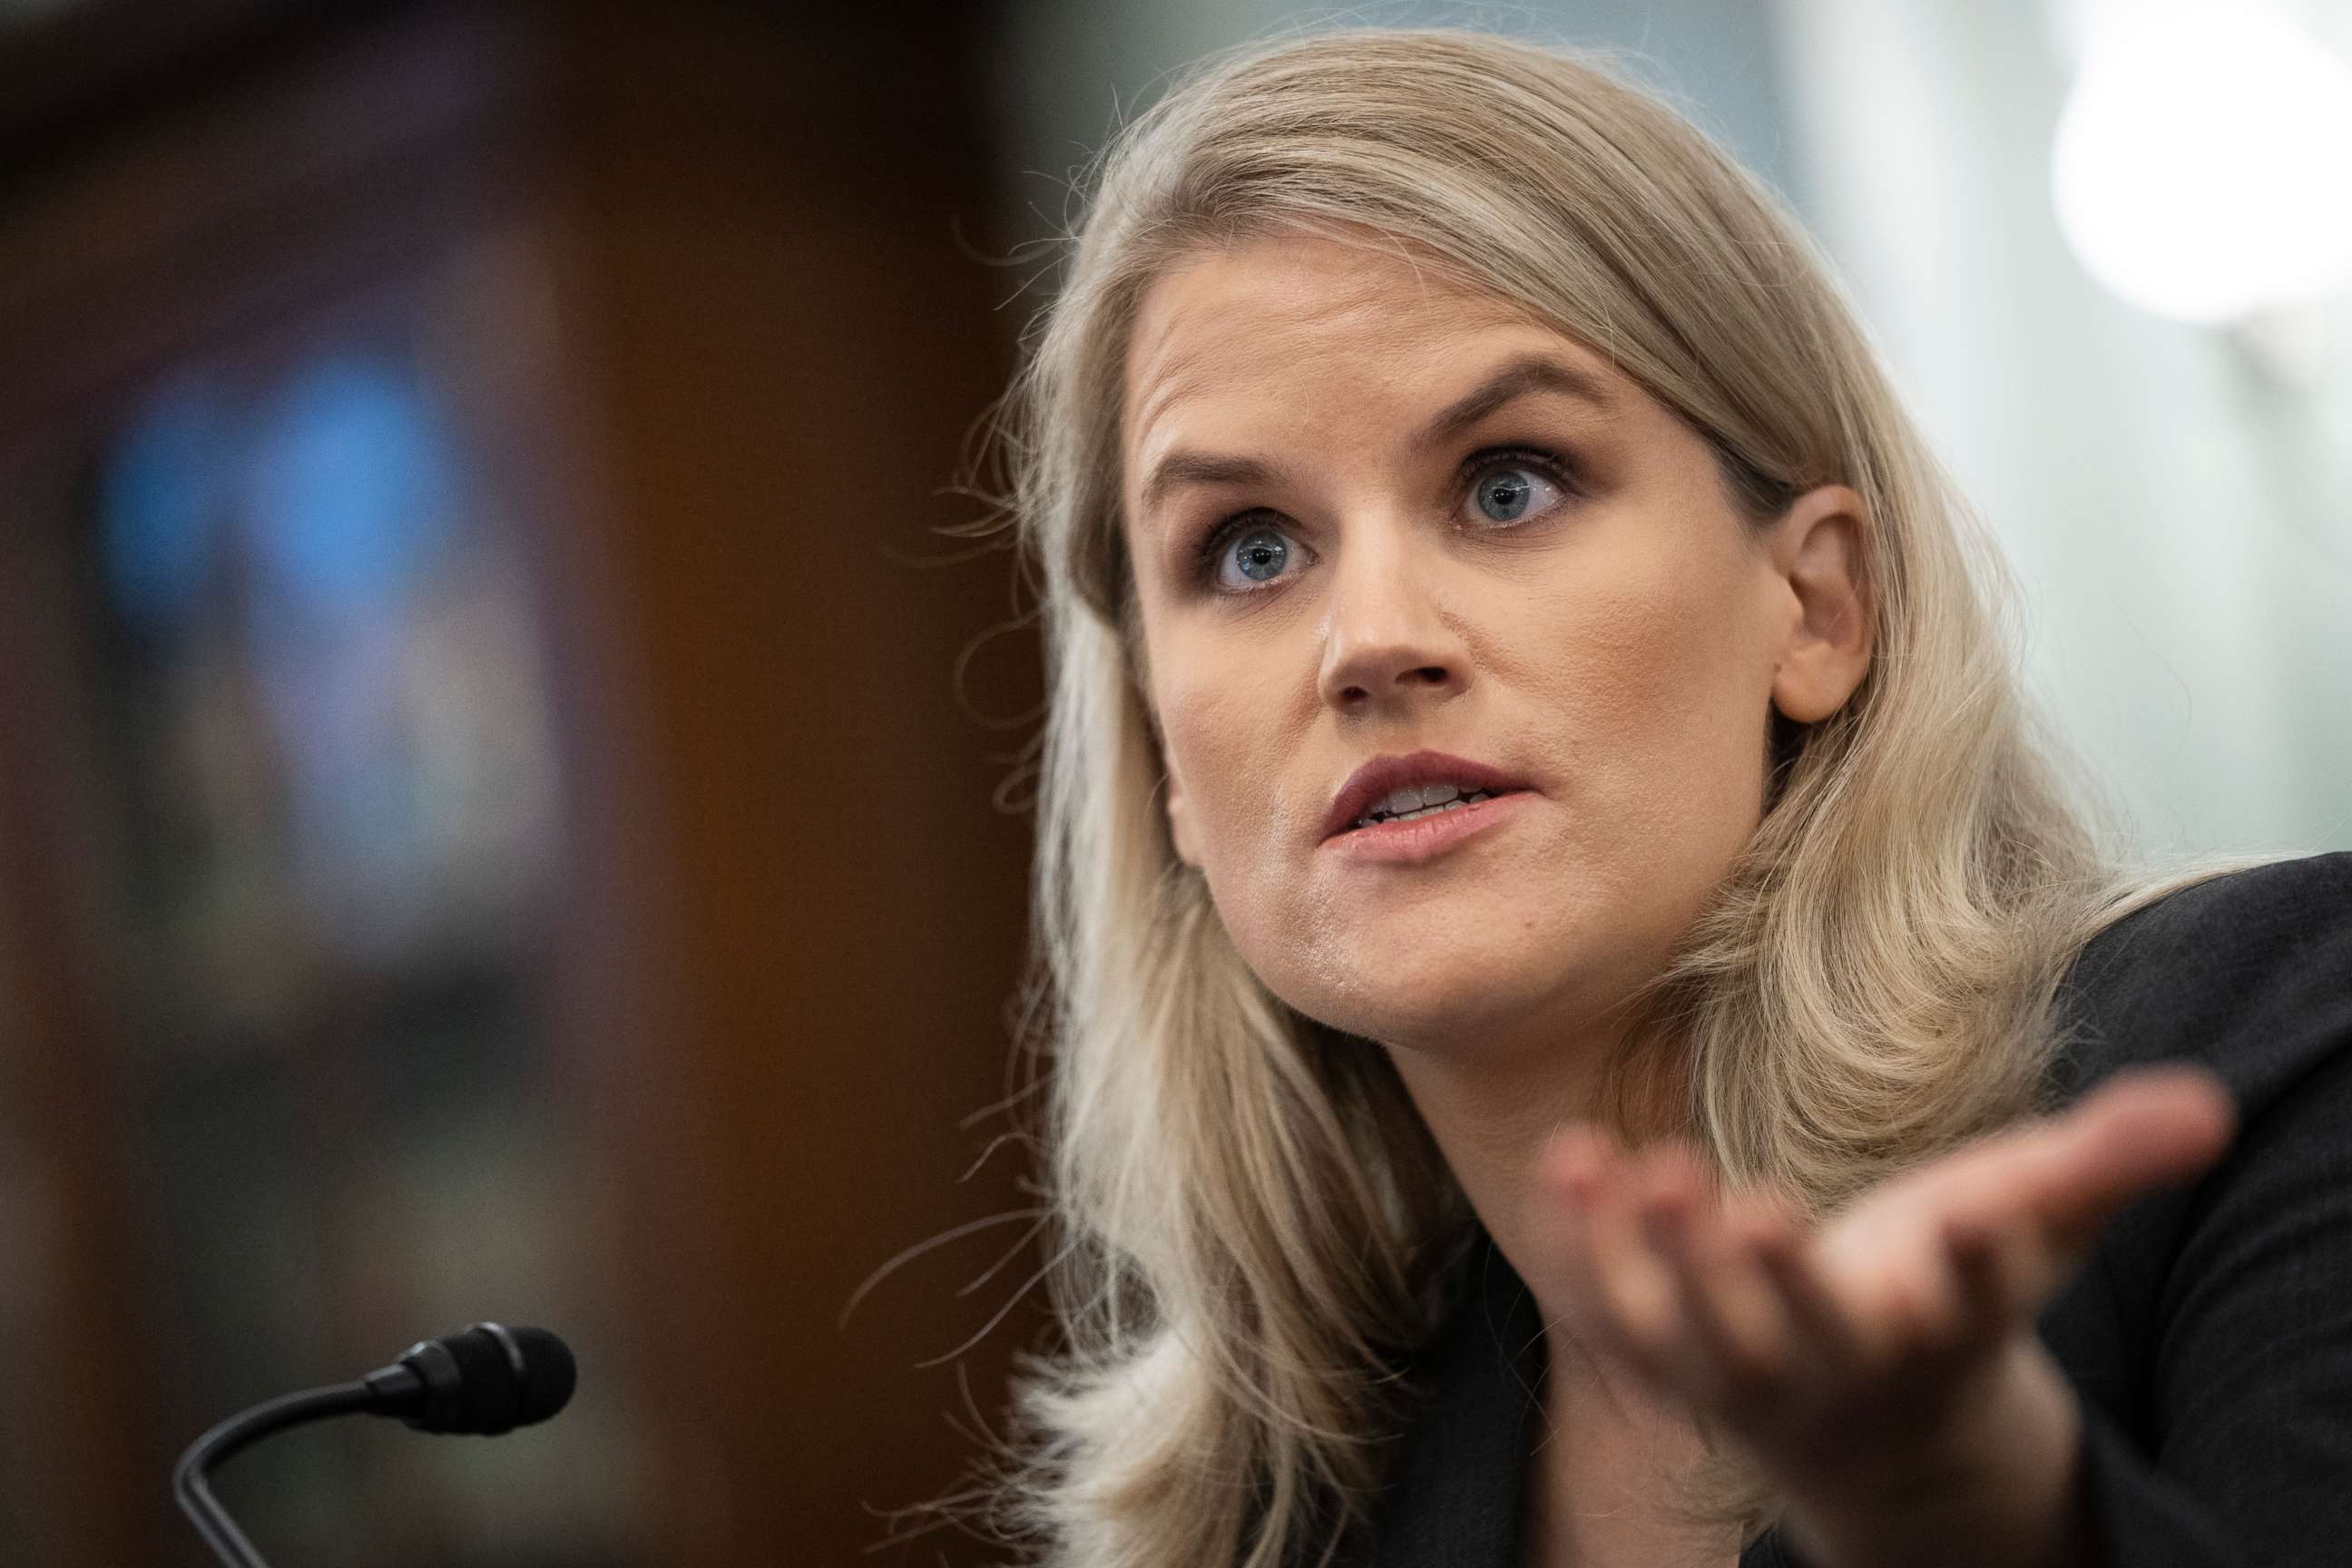 PHOTO: Former Facebook employee Frances Haugen testifies during a Senate Committee on Commerce, Science, and Transportation hearing entitled 'Protecting Kids Online: Testimony from a Facebook Whistleblower' on Capitol Hill, Oct. 5, 2021 in Washington, DC.